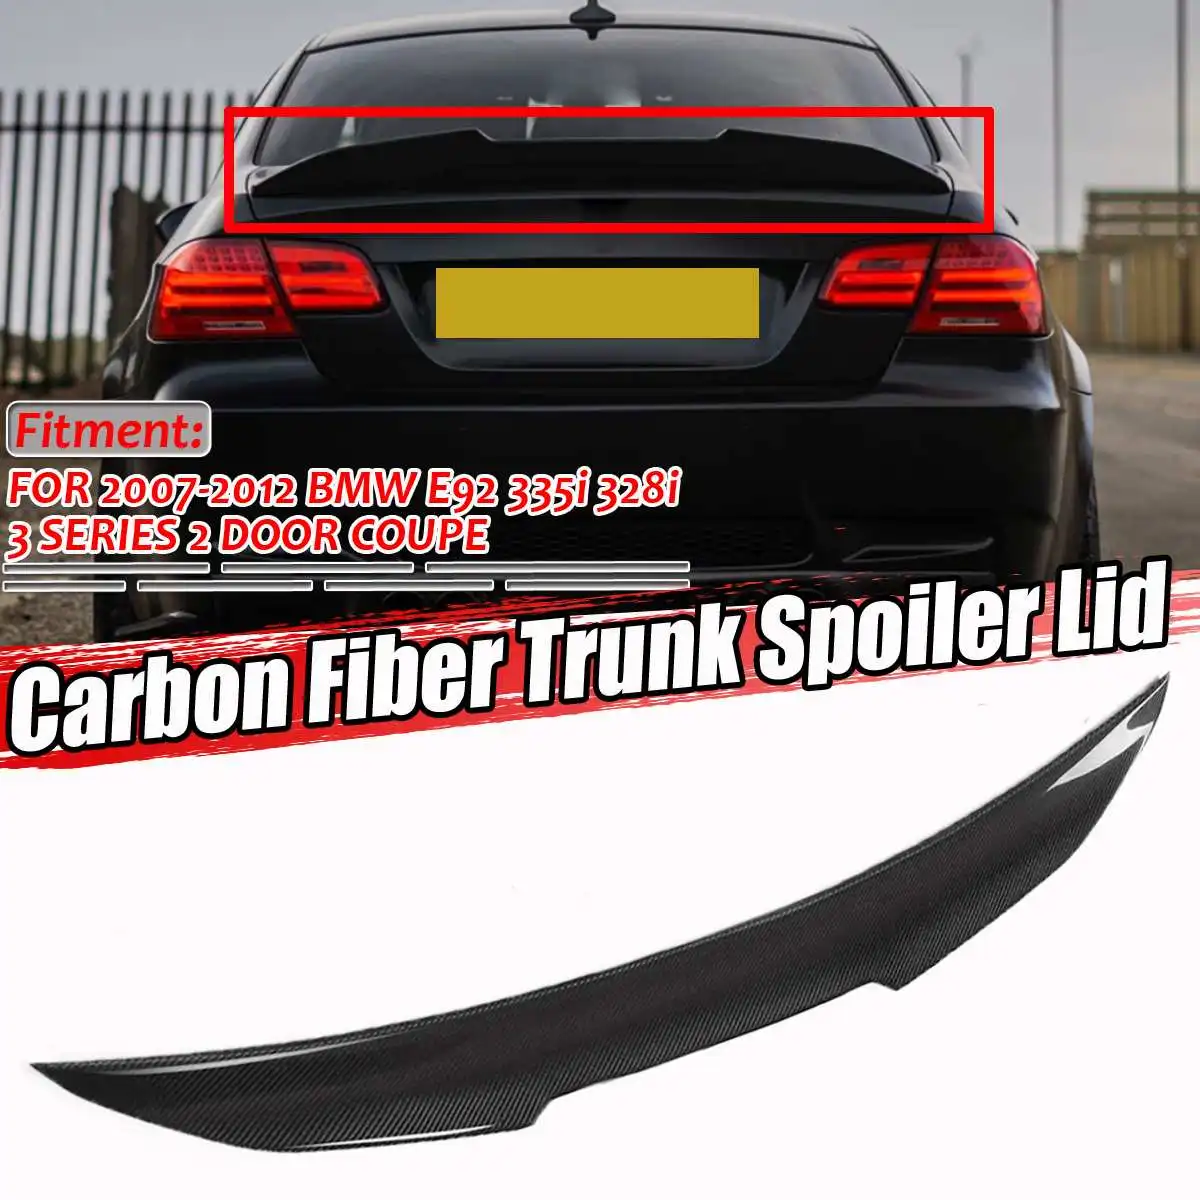 

Real Carbon Fiber Car Rear Trunk Spoiler Lip Extension PSM/M4/P Style FOR BMW E92 335i 328i 3 SERIES 2 DOOR COUPE 2007-2012